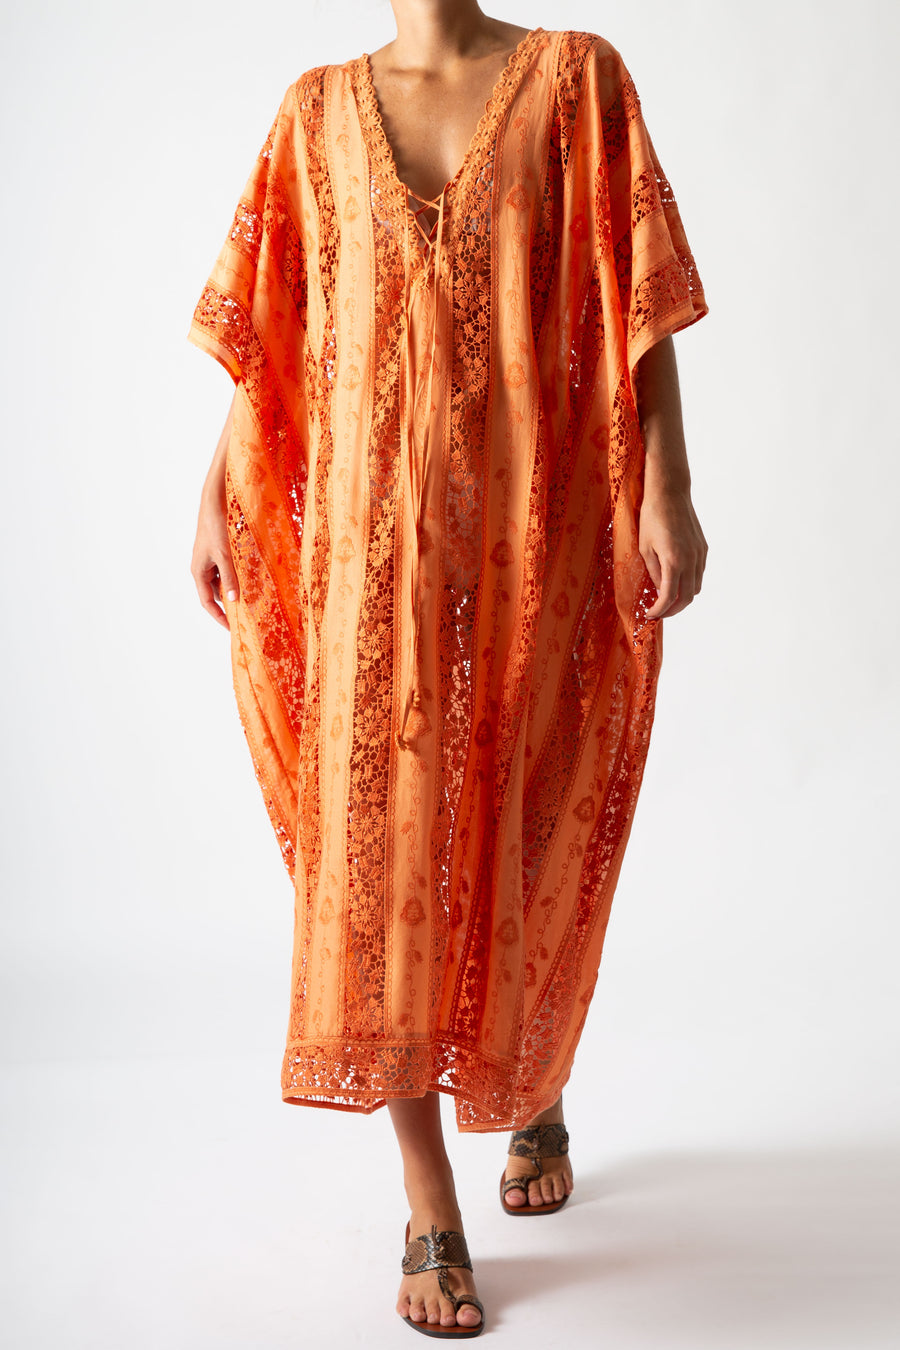 This is a photo of a woman wearing an orange embroidered cover up. She wears this with snakeskin sandals.